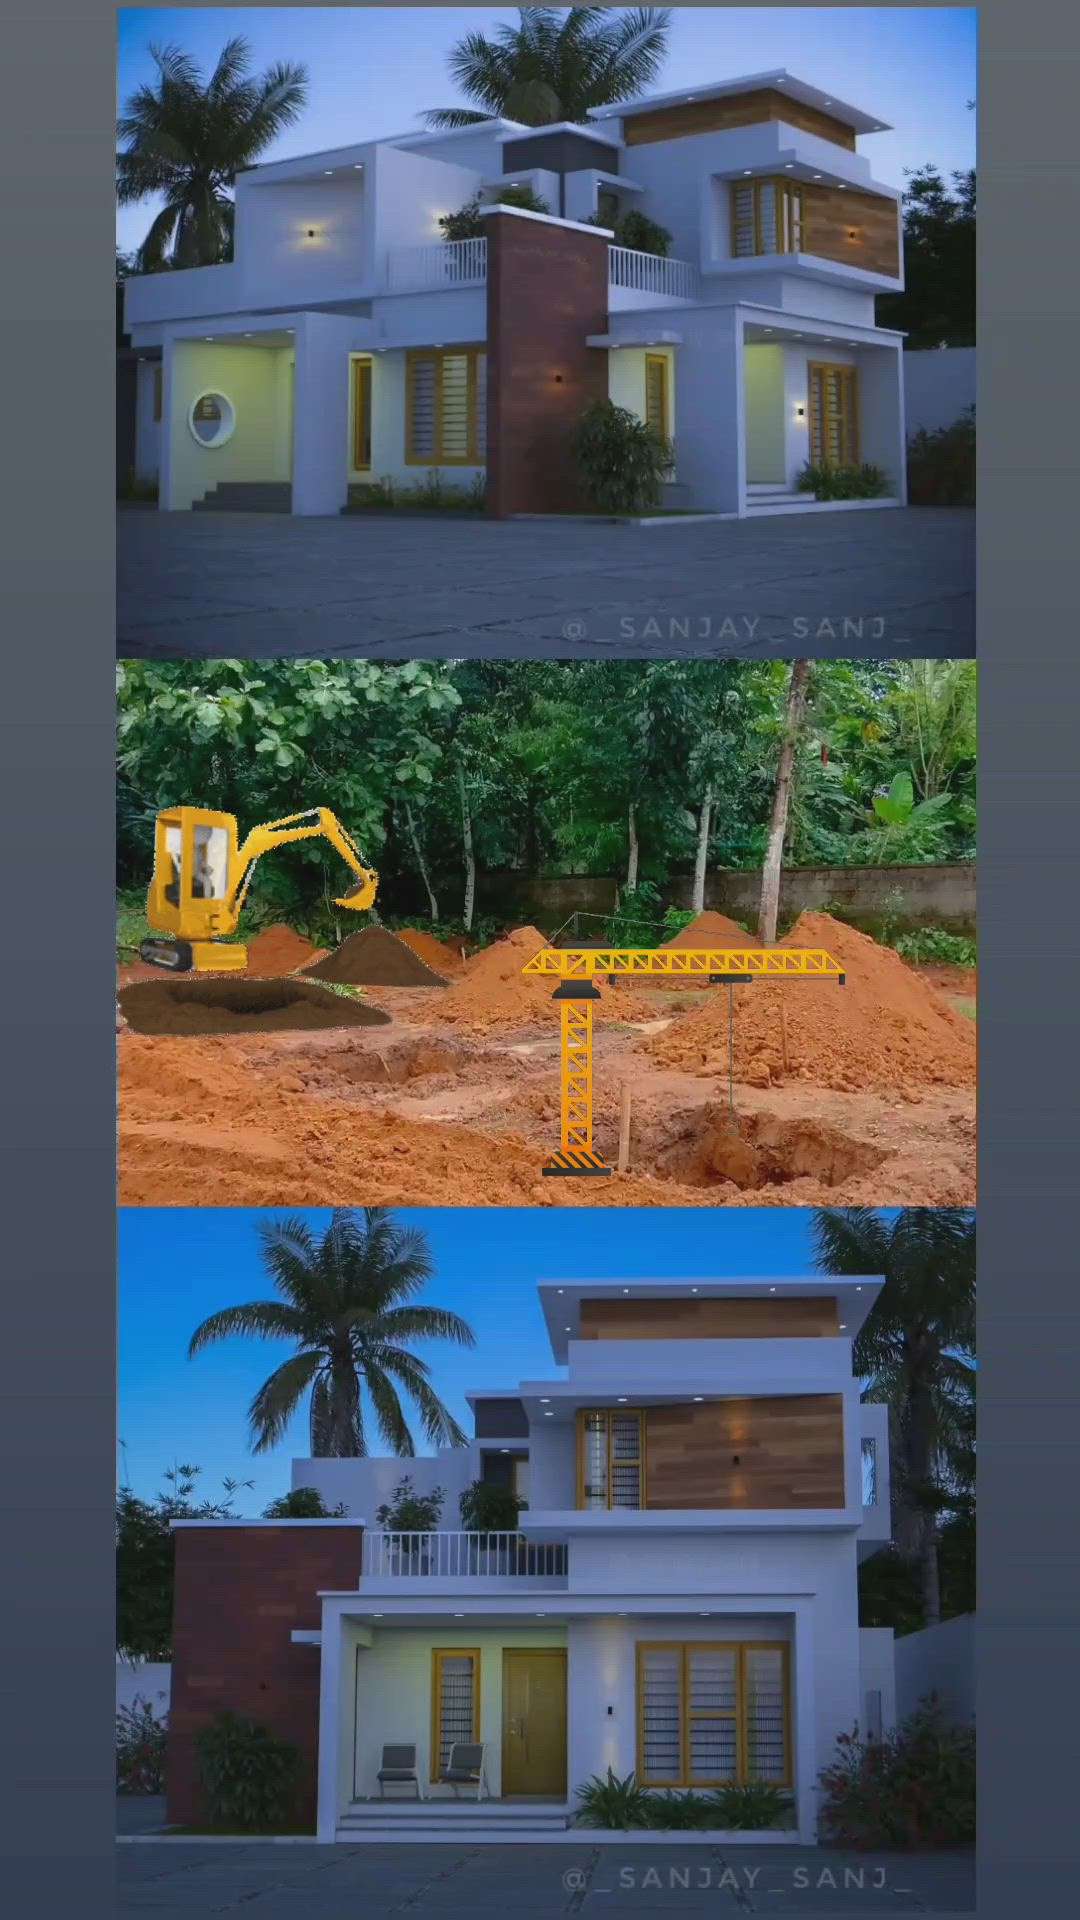 Work started @ puthoor



#ContemporaryHouse #home
#HouseDesigns #40LakhHouse #vrayrender #3BHKPlans #keralaarchitectures #KeralaStyleHouse #Architect #MrHomeKerala #architecturedesigns #CivilEngineer #Contractor #exterior_Work #buildersinkerala #ConstructionTools